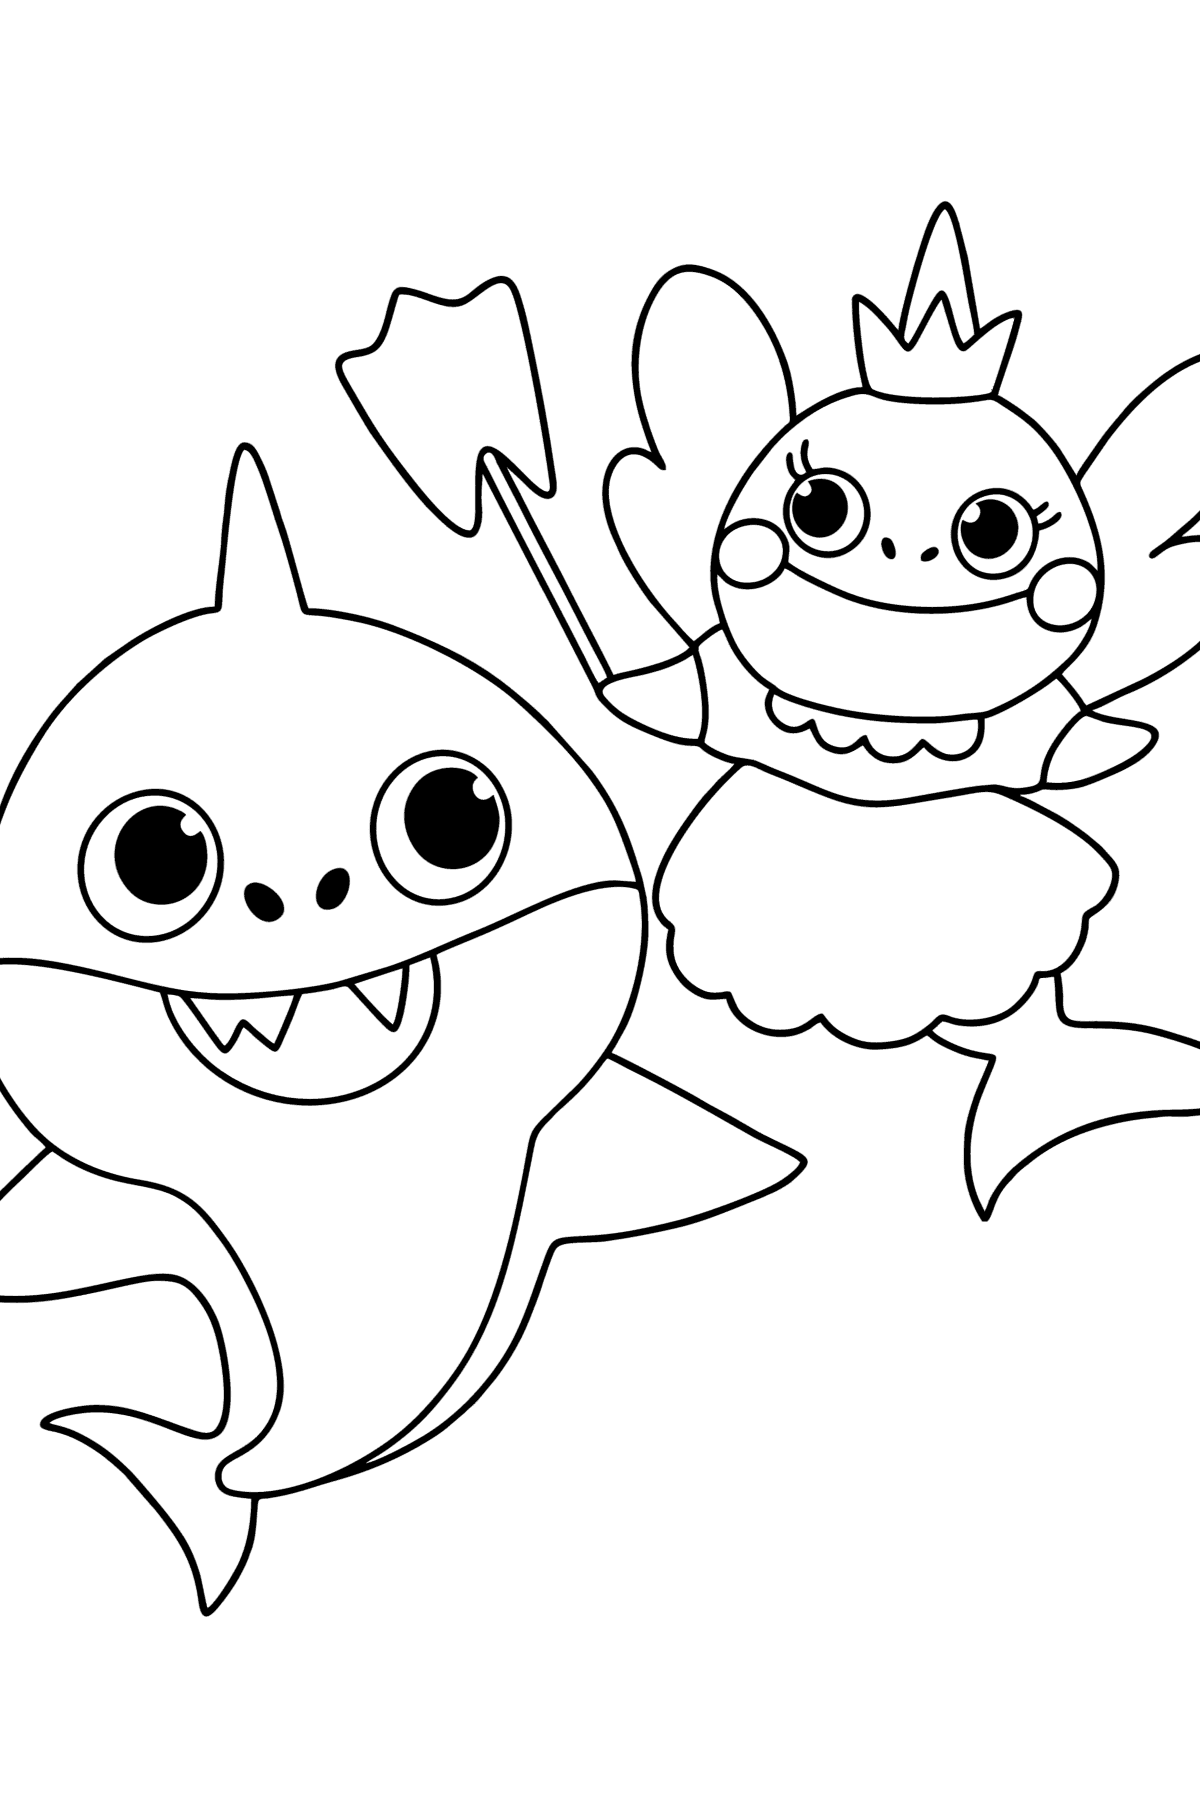 Tooth fairy and Baby shark coloring page - Coloring Pages for Kids